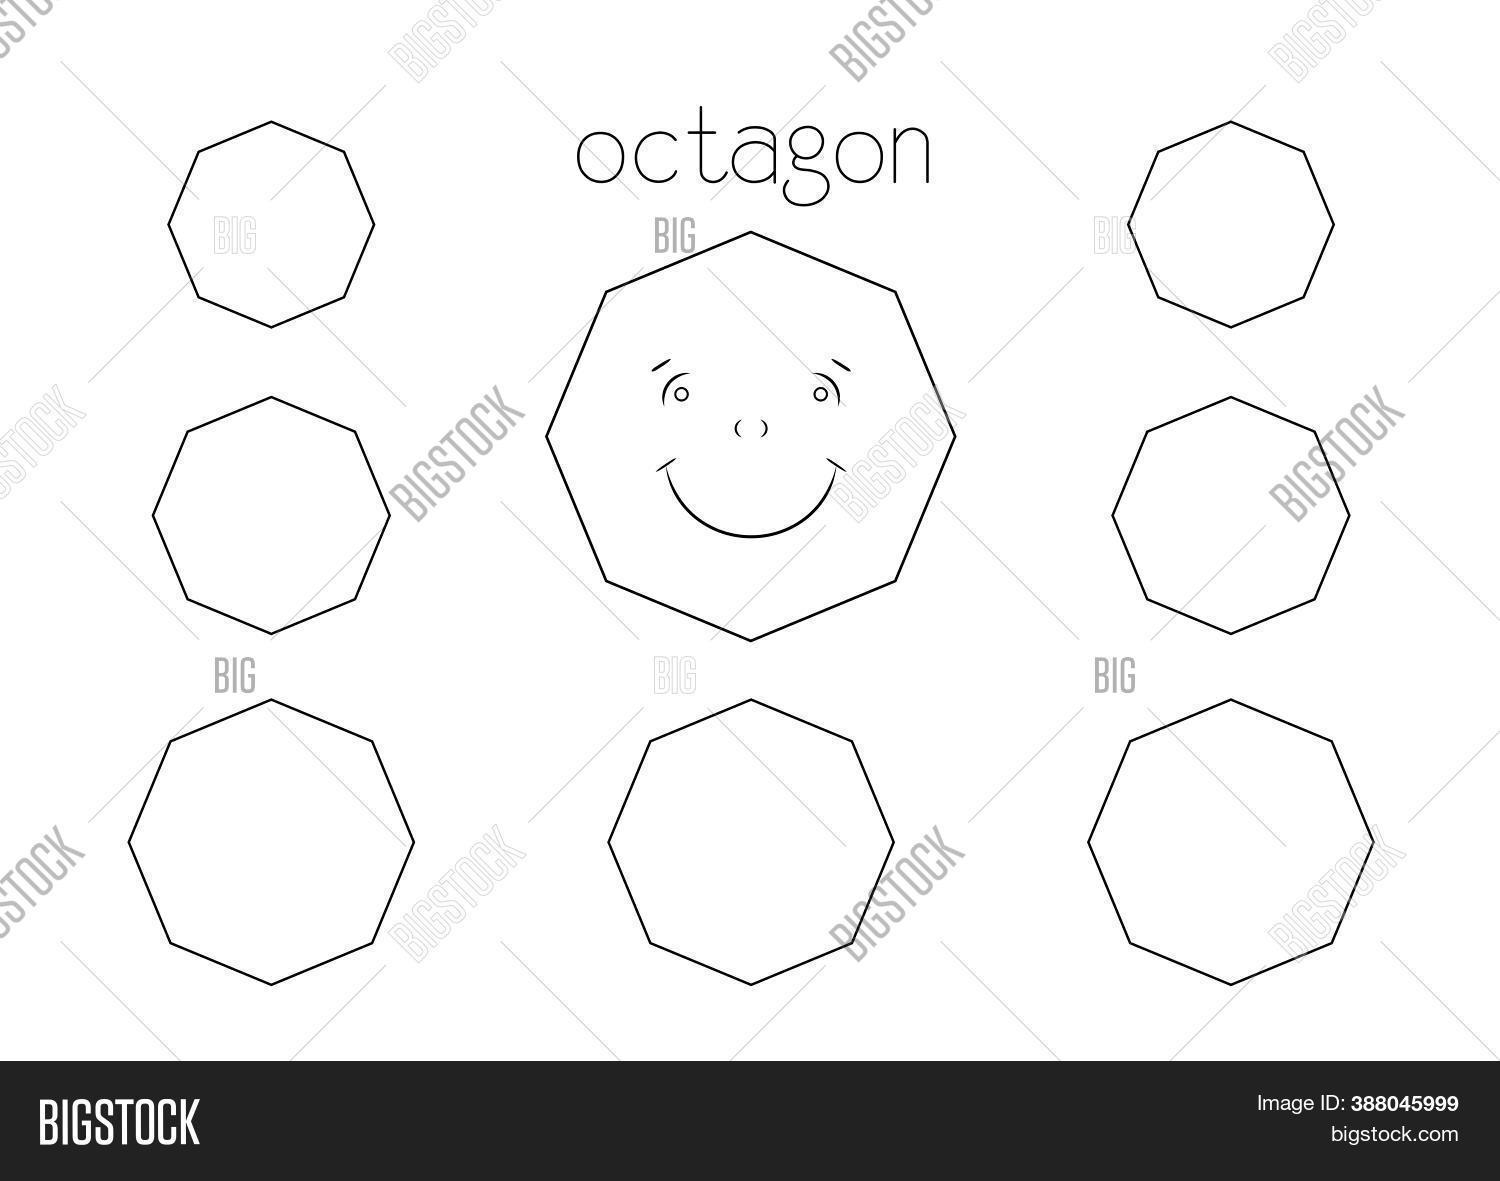 Learning shapes image photo free trial bigstock